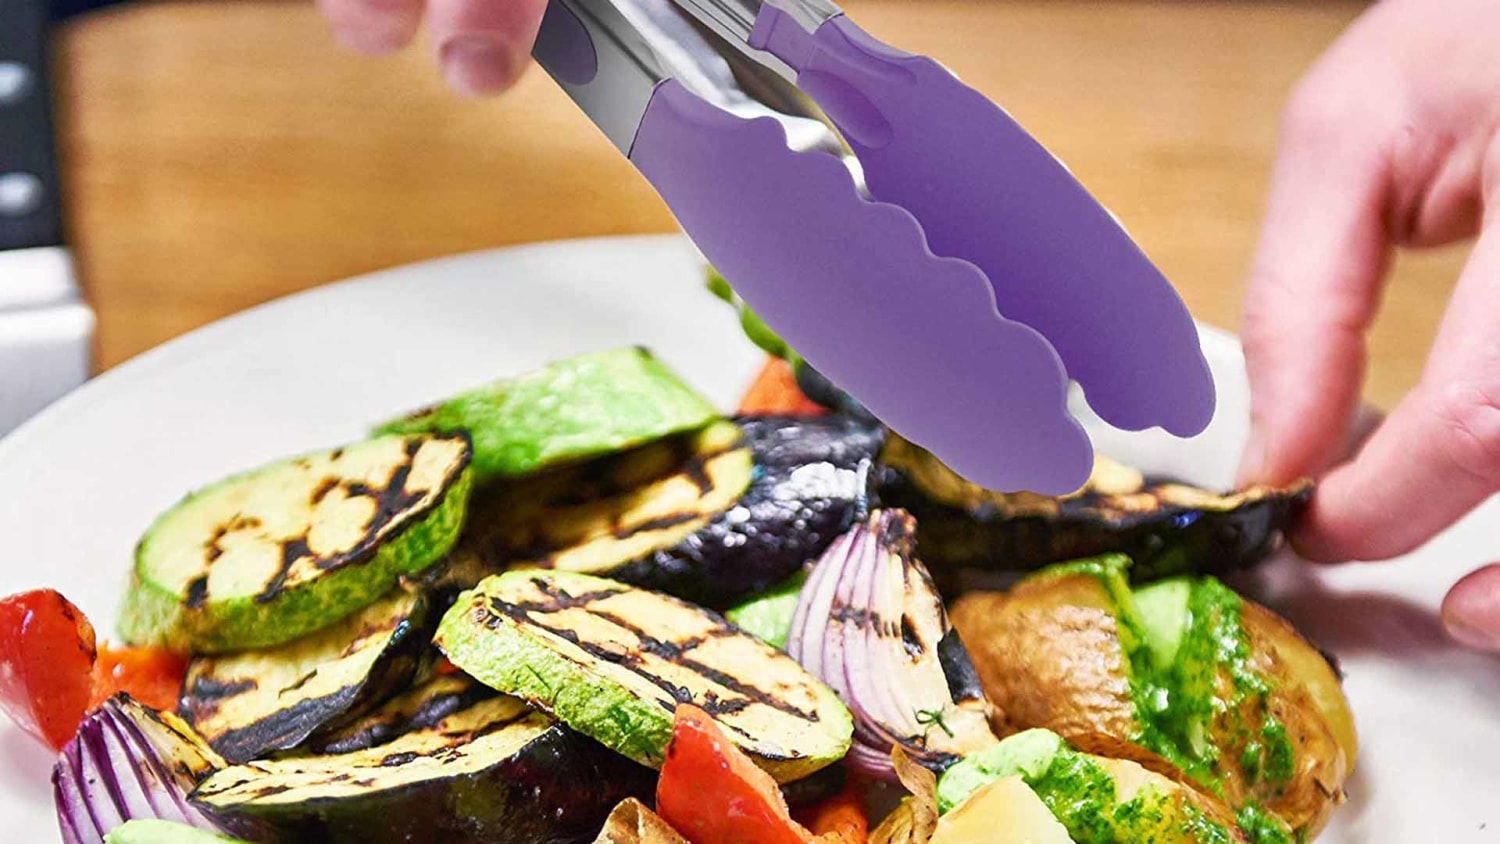 These Kitchen Tongs Are an Epicurious Team Favorite